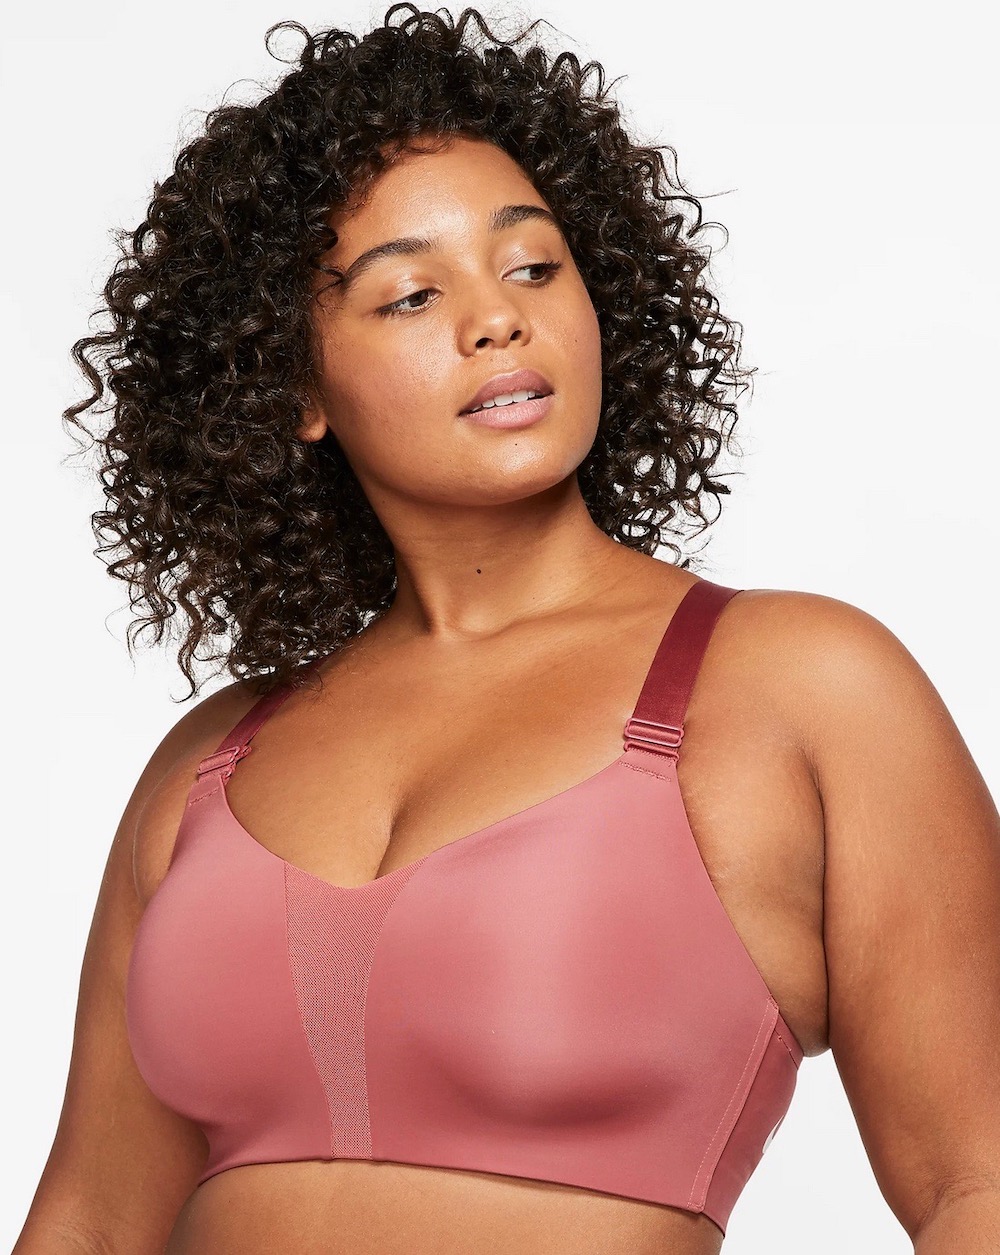 13 Sports Bras for Big Breasts That Are Functional AND Fashionable